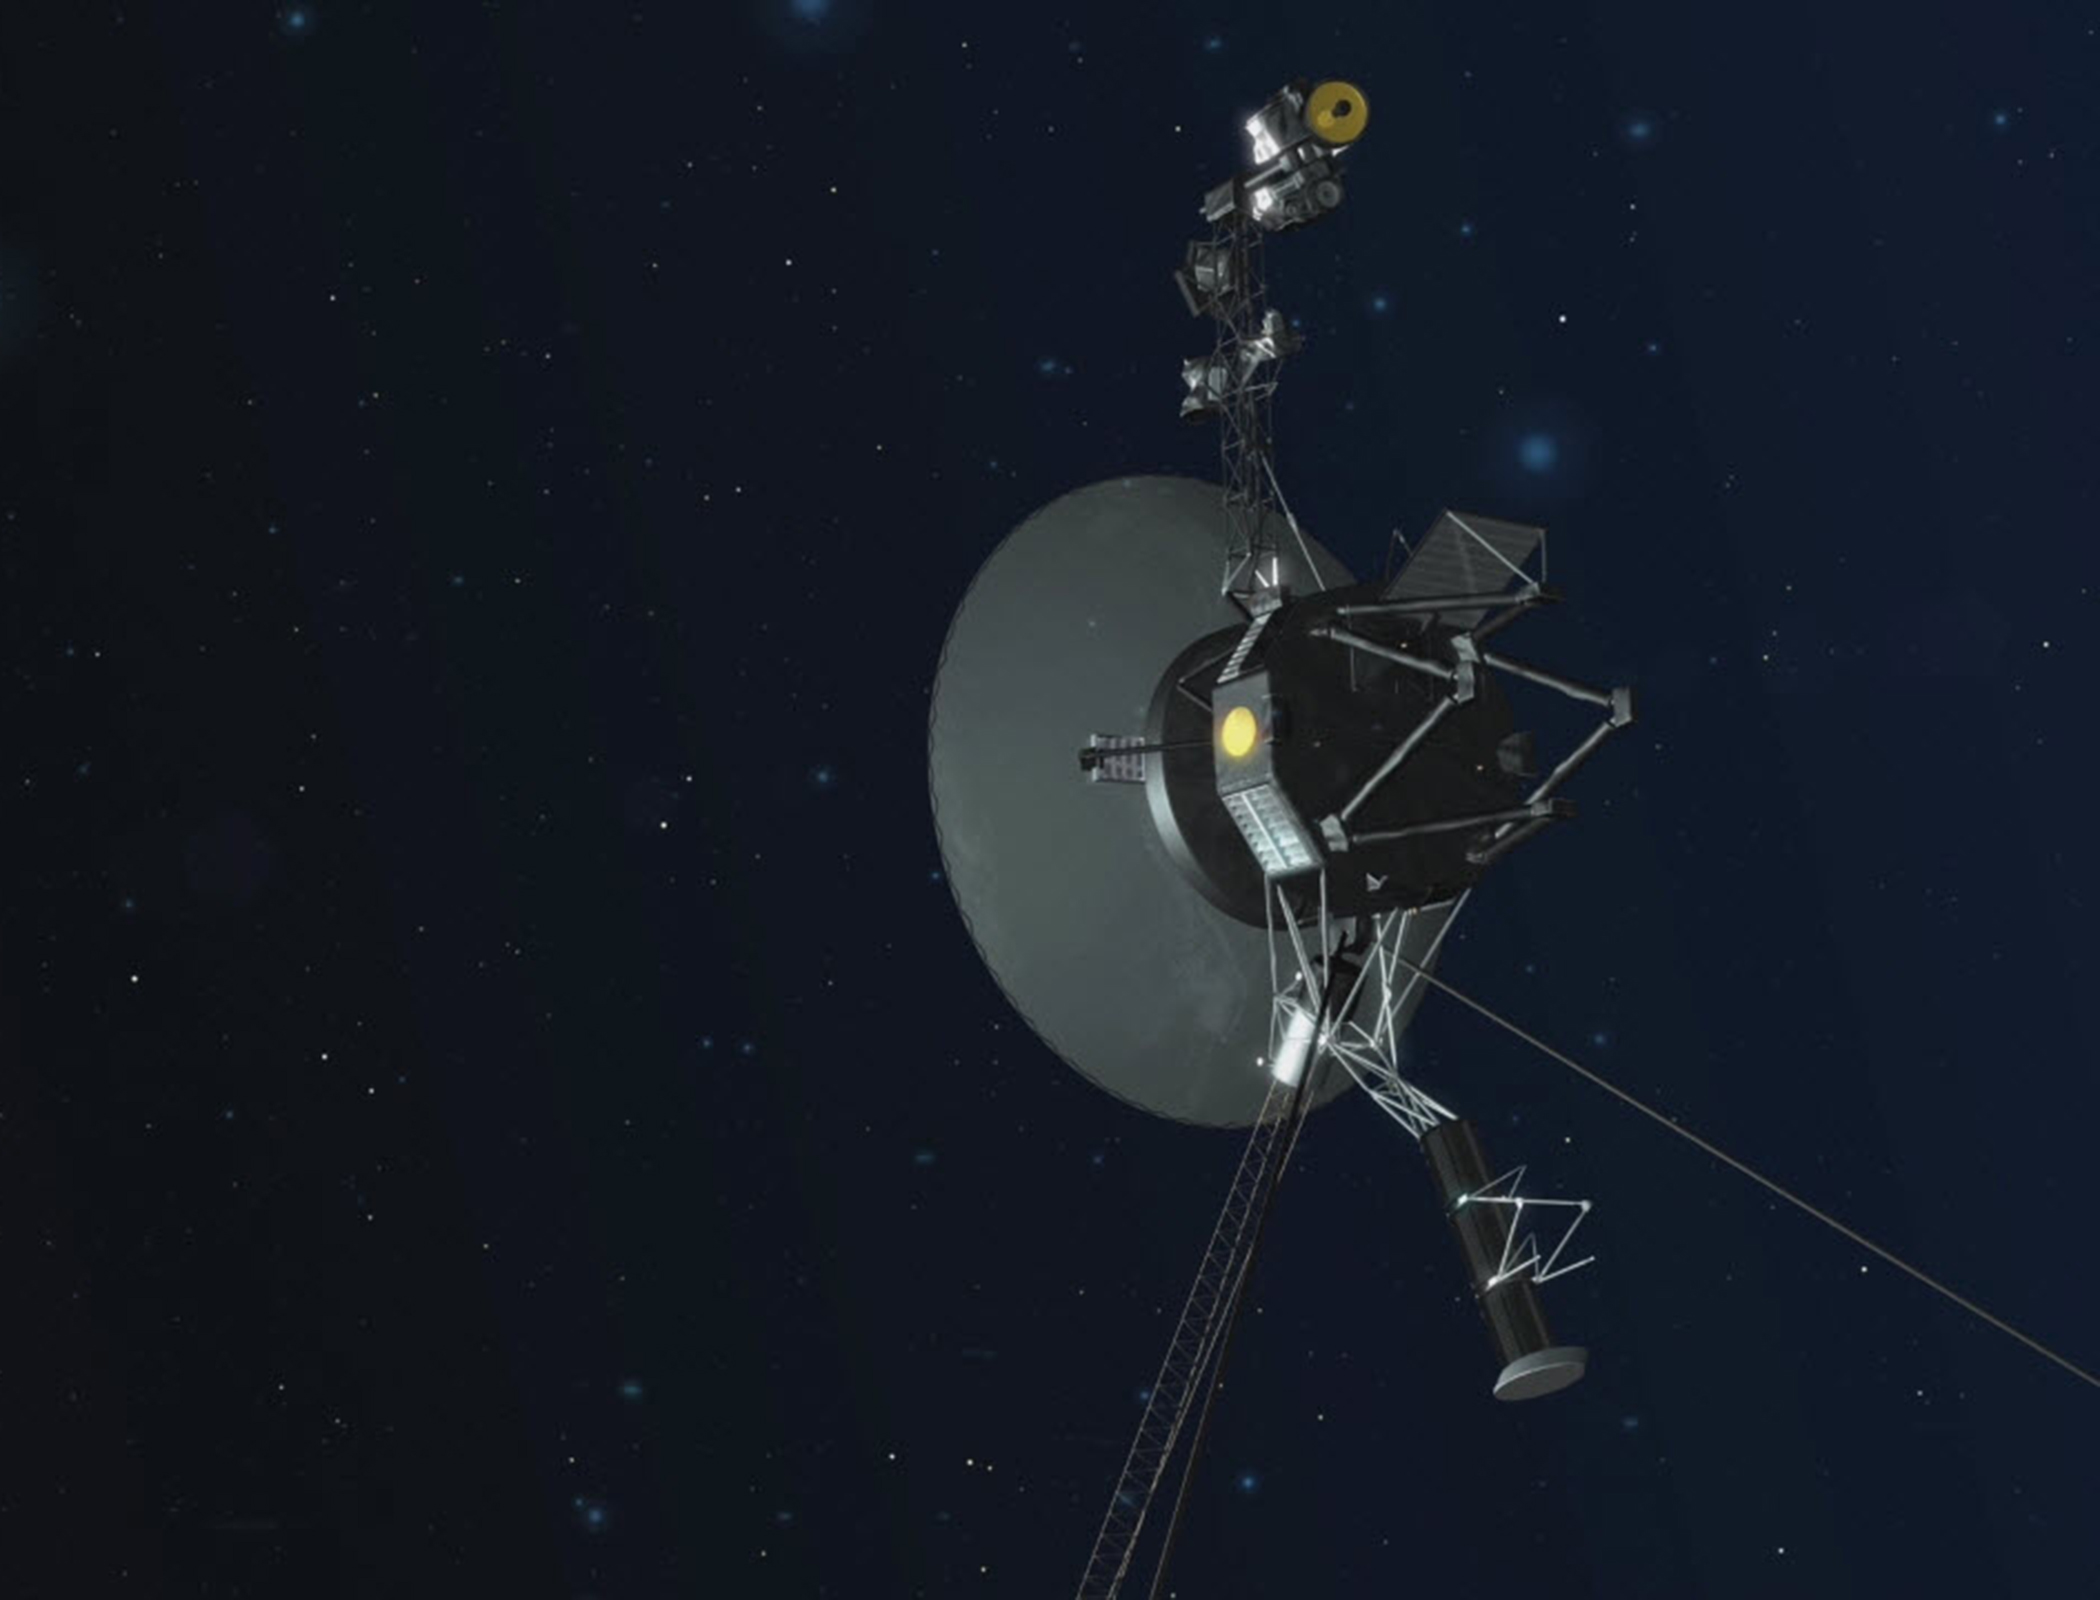 Nasa hears Voyager 2 ‘heartbeat’ after accidentally severing contact